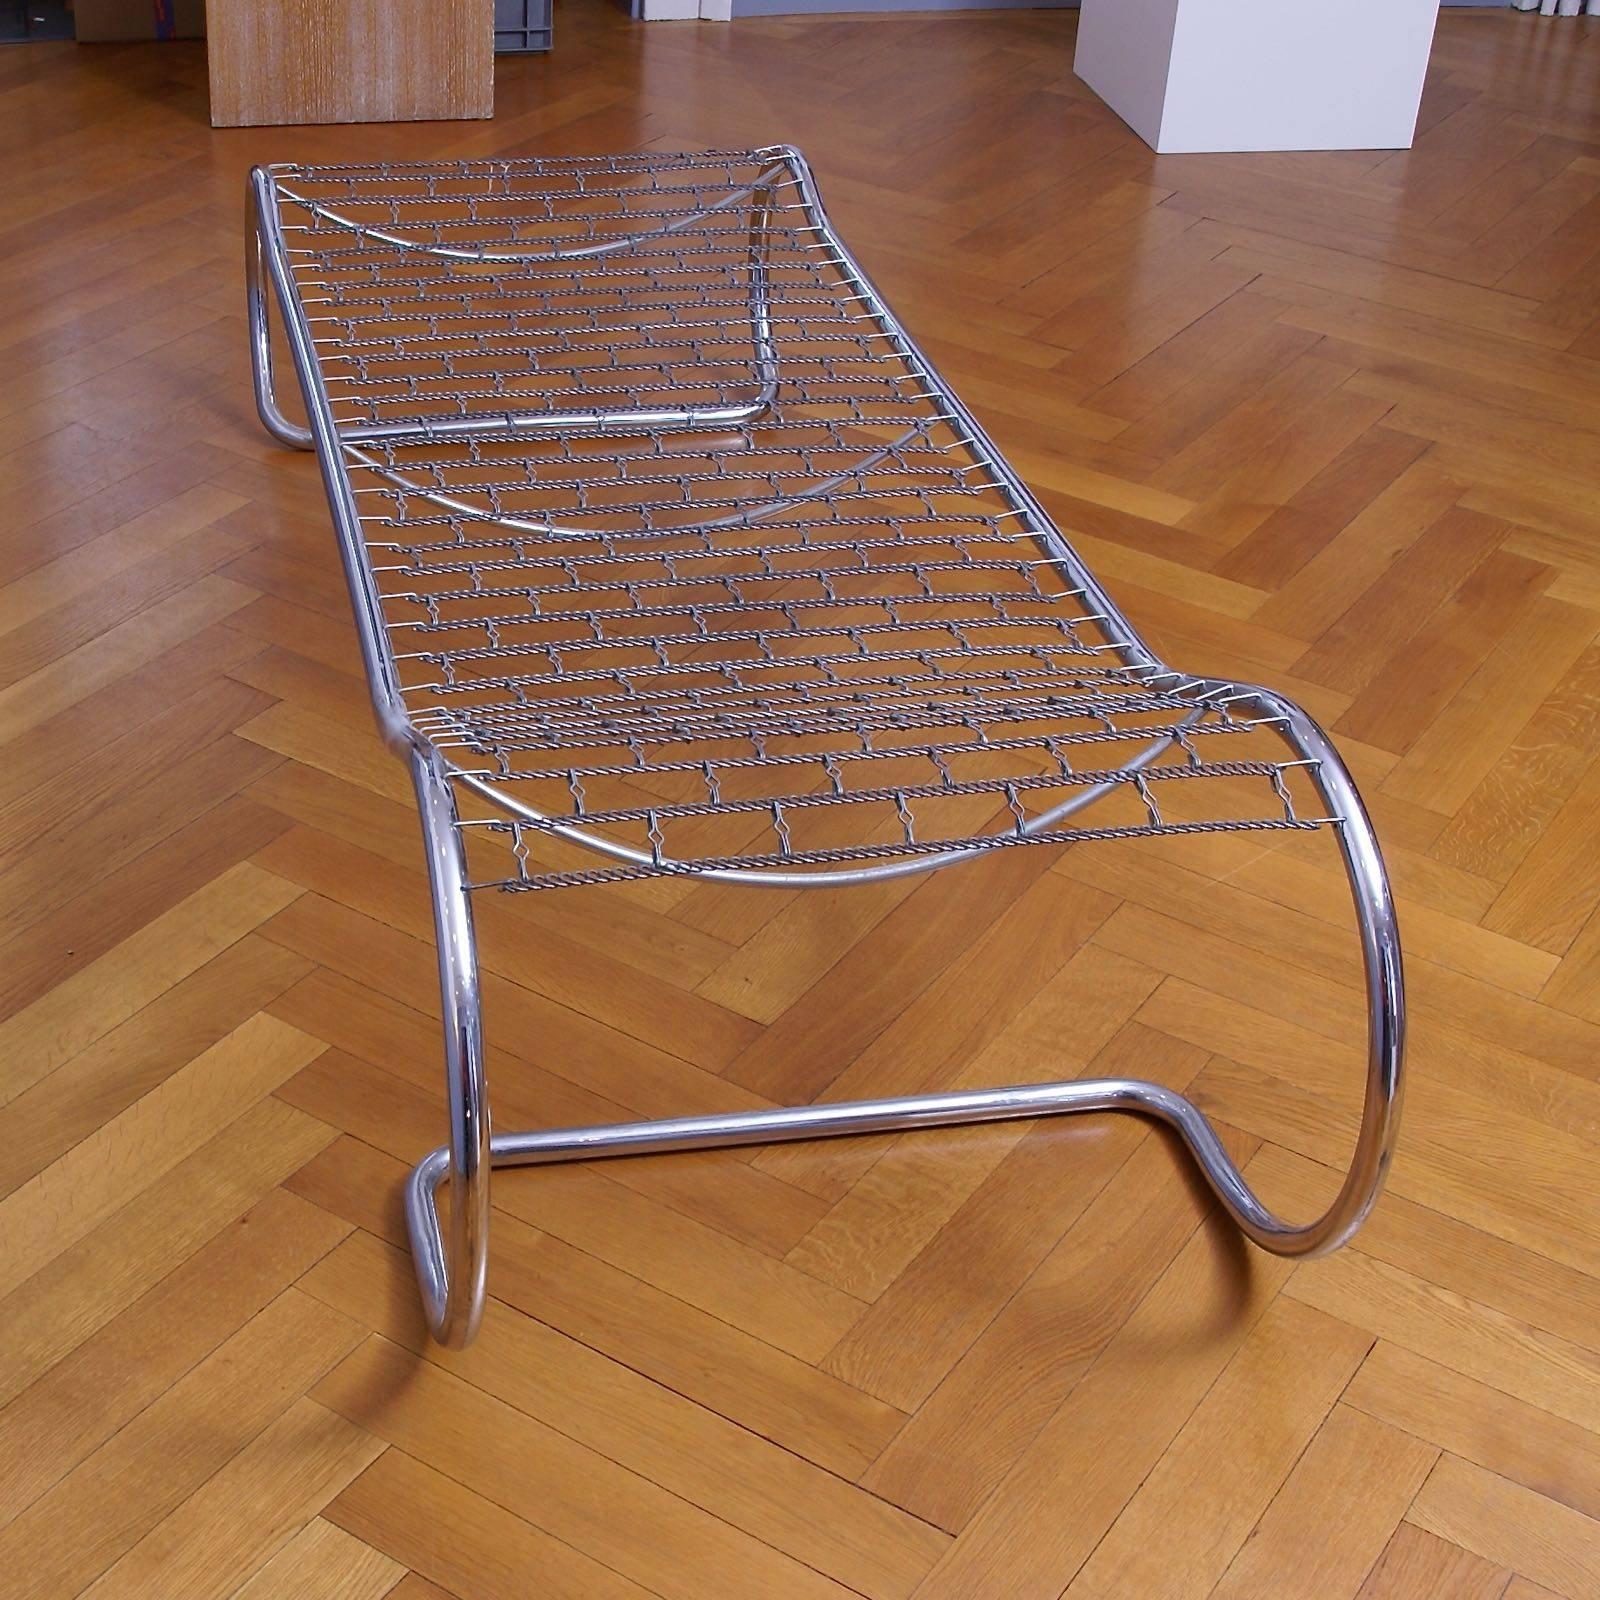 Rare Chrome and Leather Bauhaus Thonet LS 23 Daybed by Anton Lorenz For Sale 4